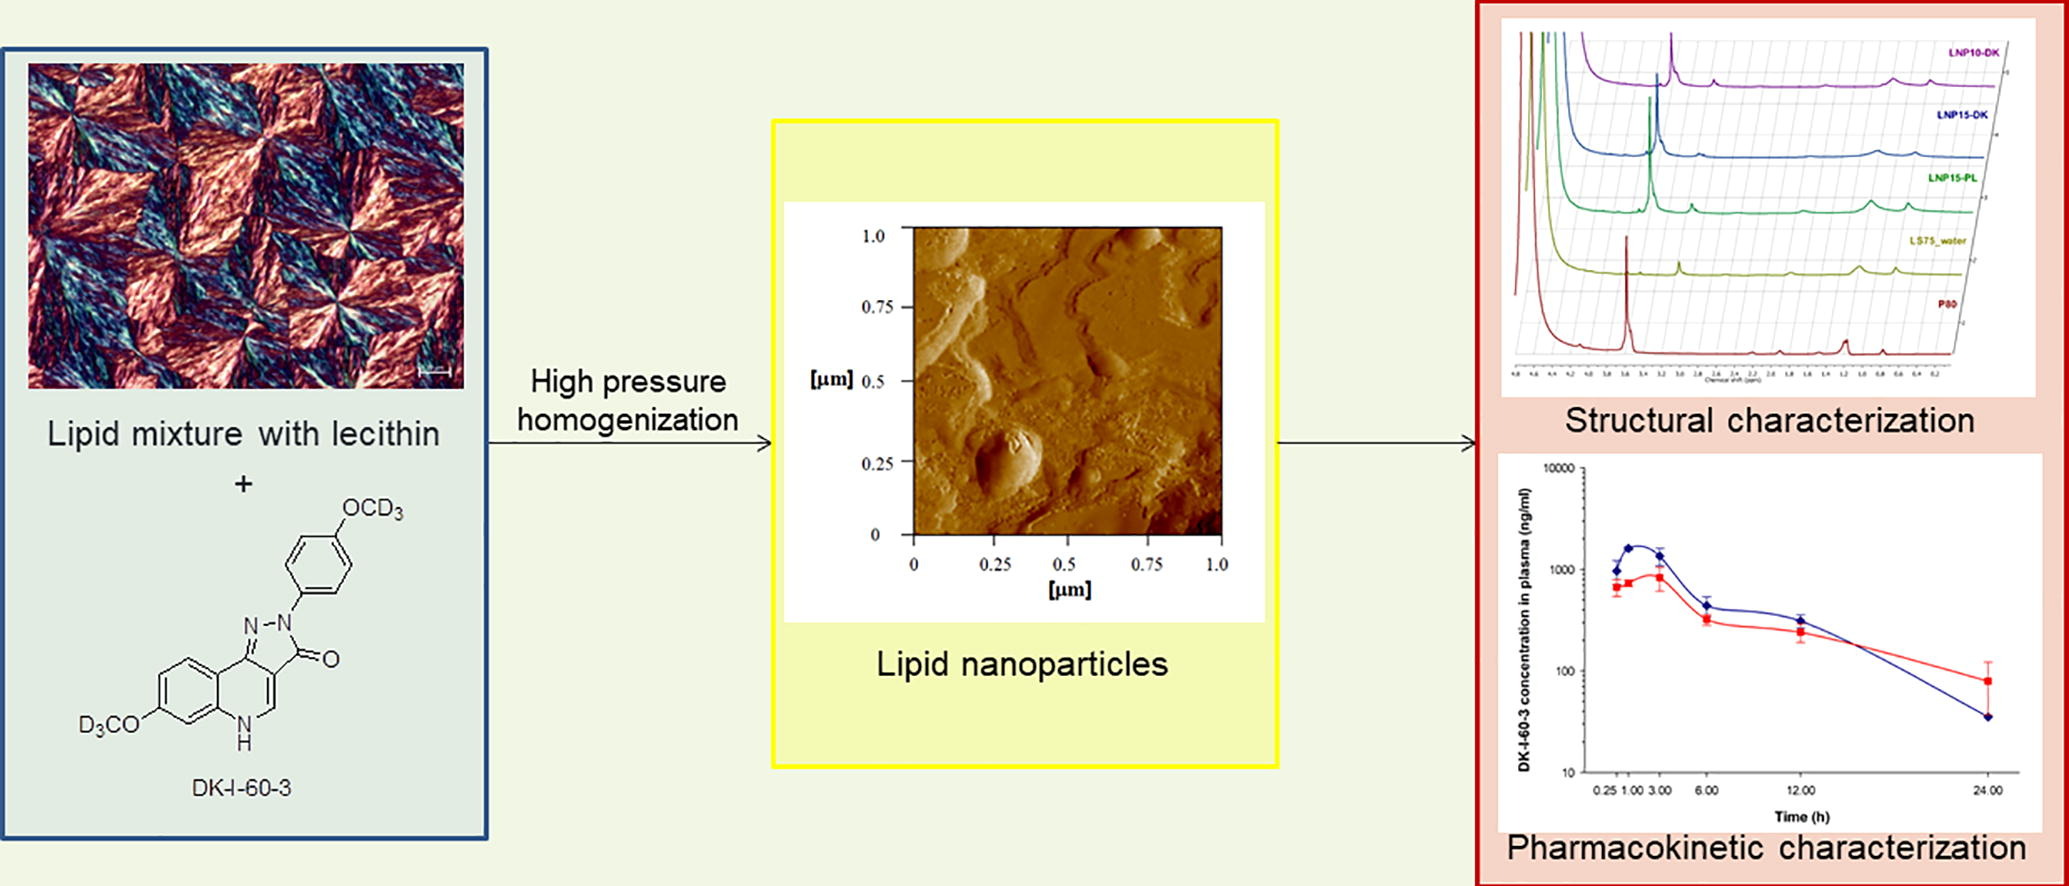 High amount of lecithin facilitates oral delivery of a poorly soluble pyrazoloquinolinone ligand formulated in lipid nanoparticles: physicochemical, structural and pharmacokinetic performances